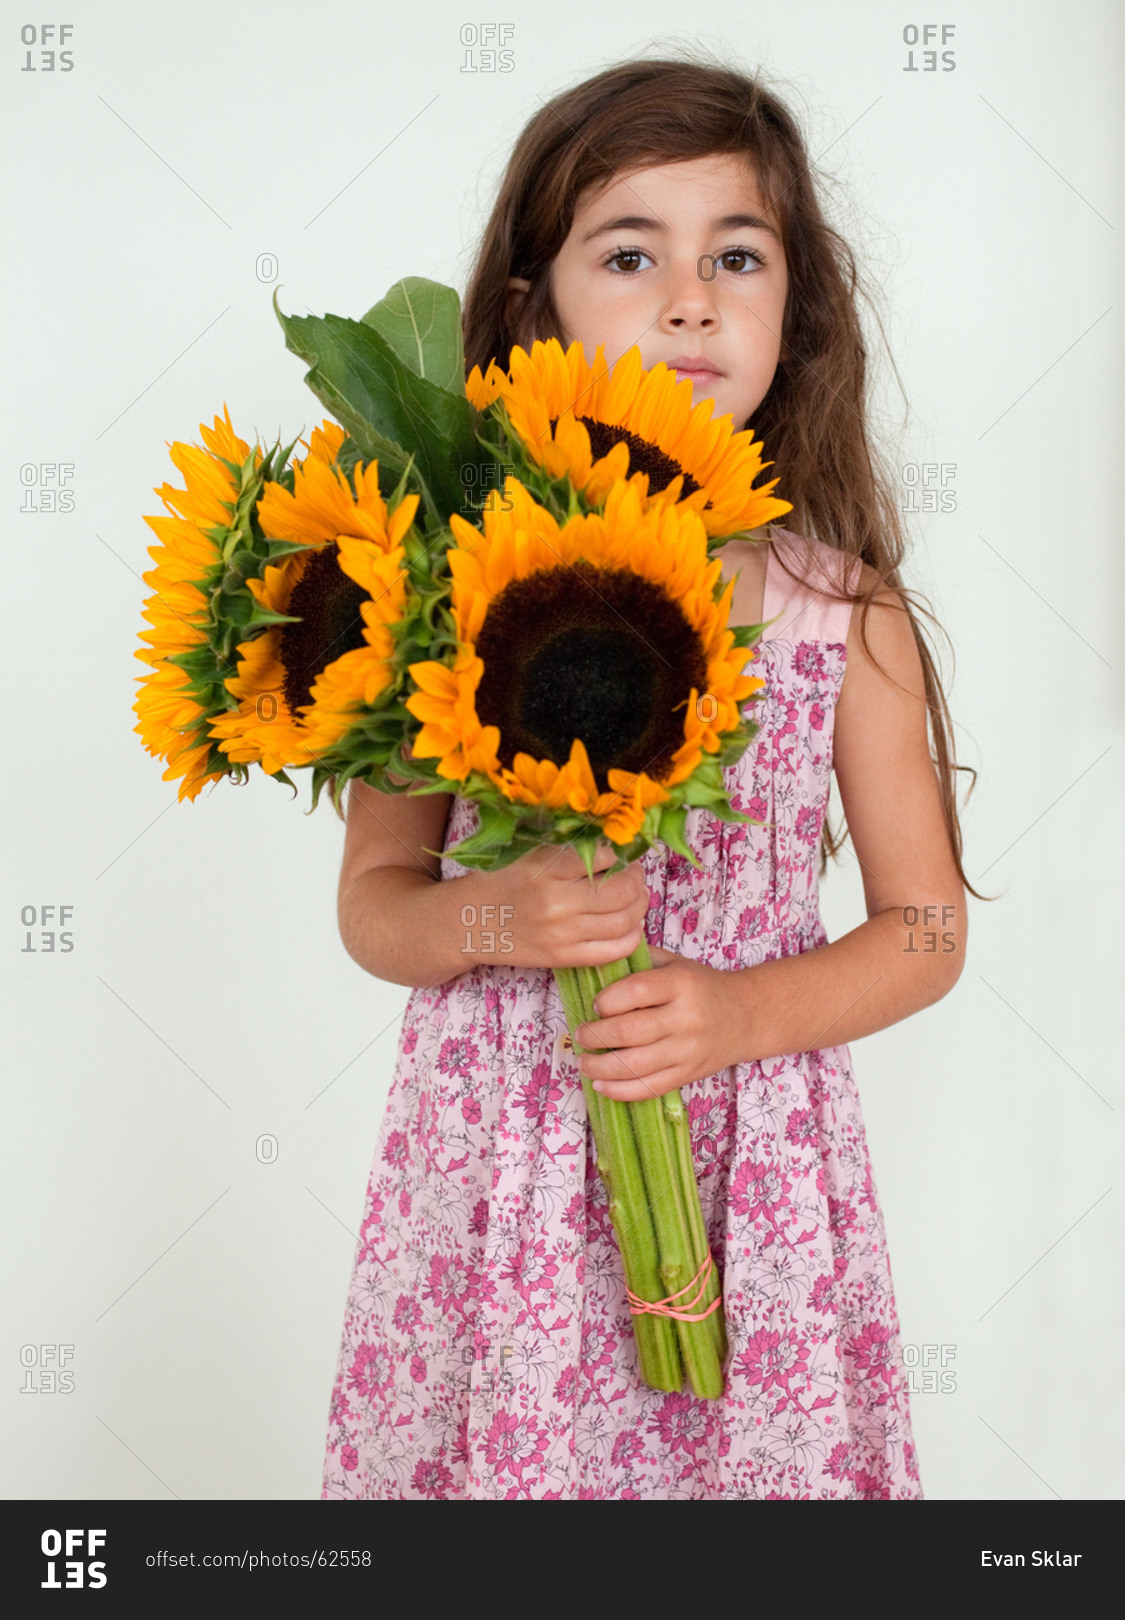 Portrait of young girl holding sunflowers